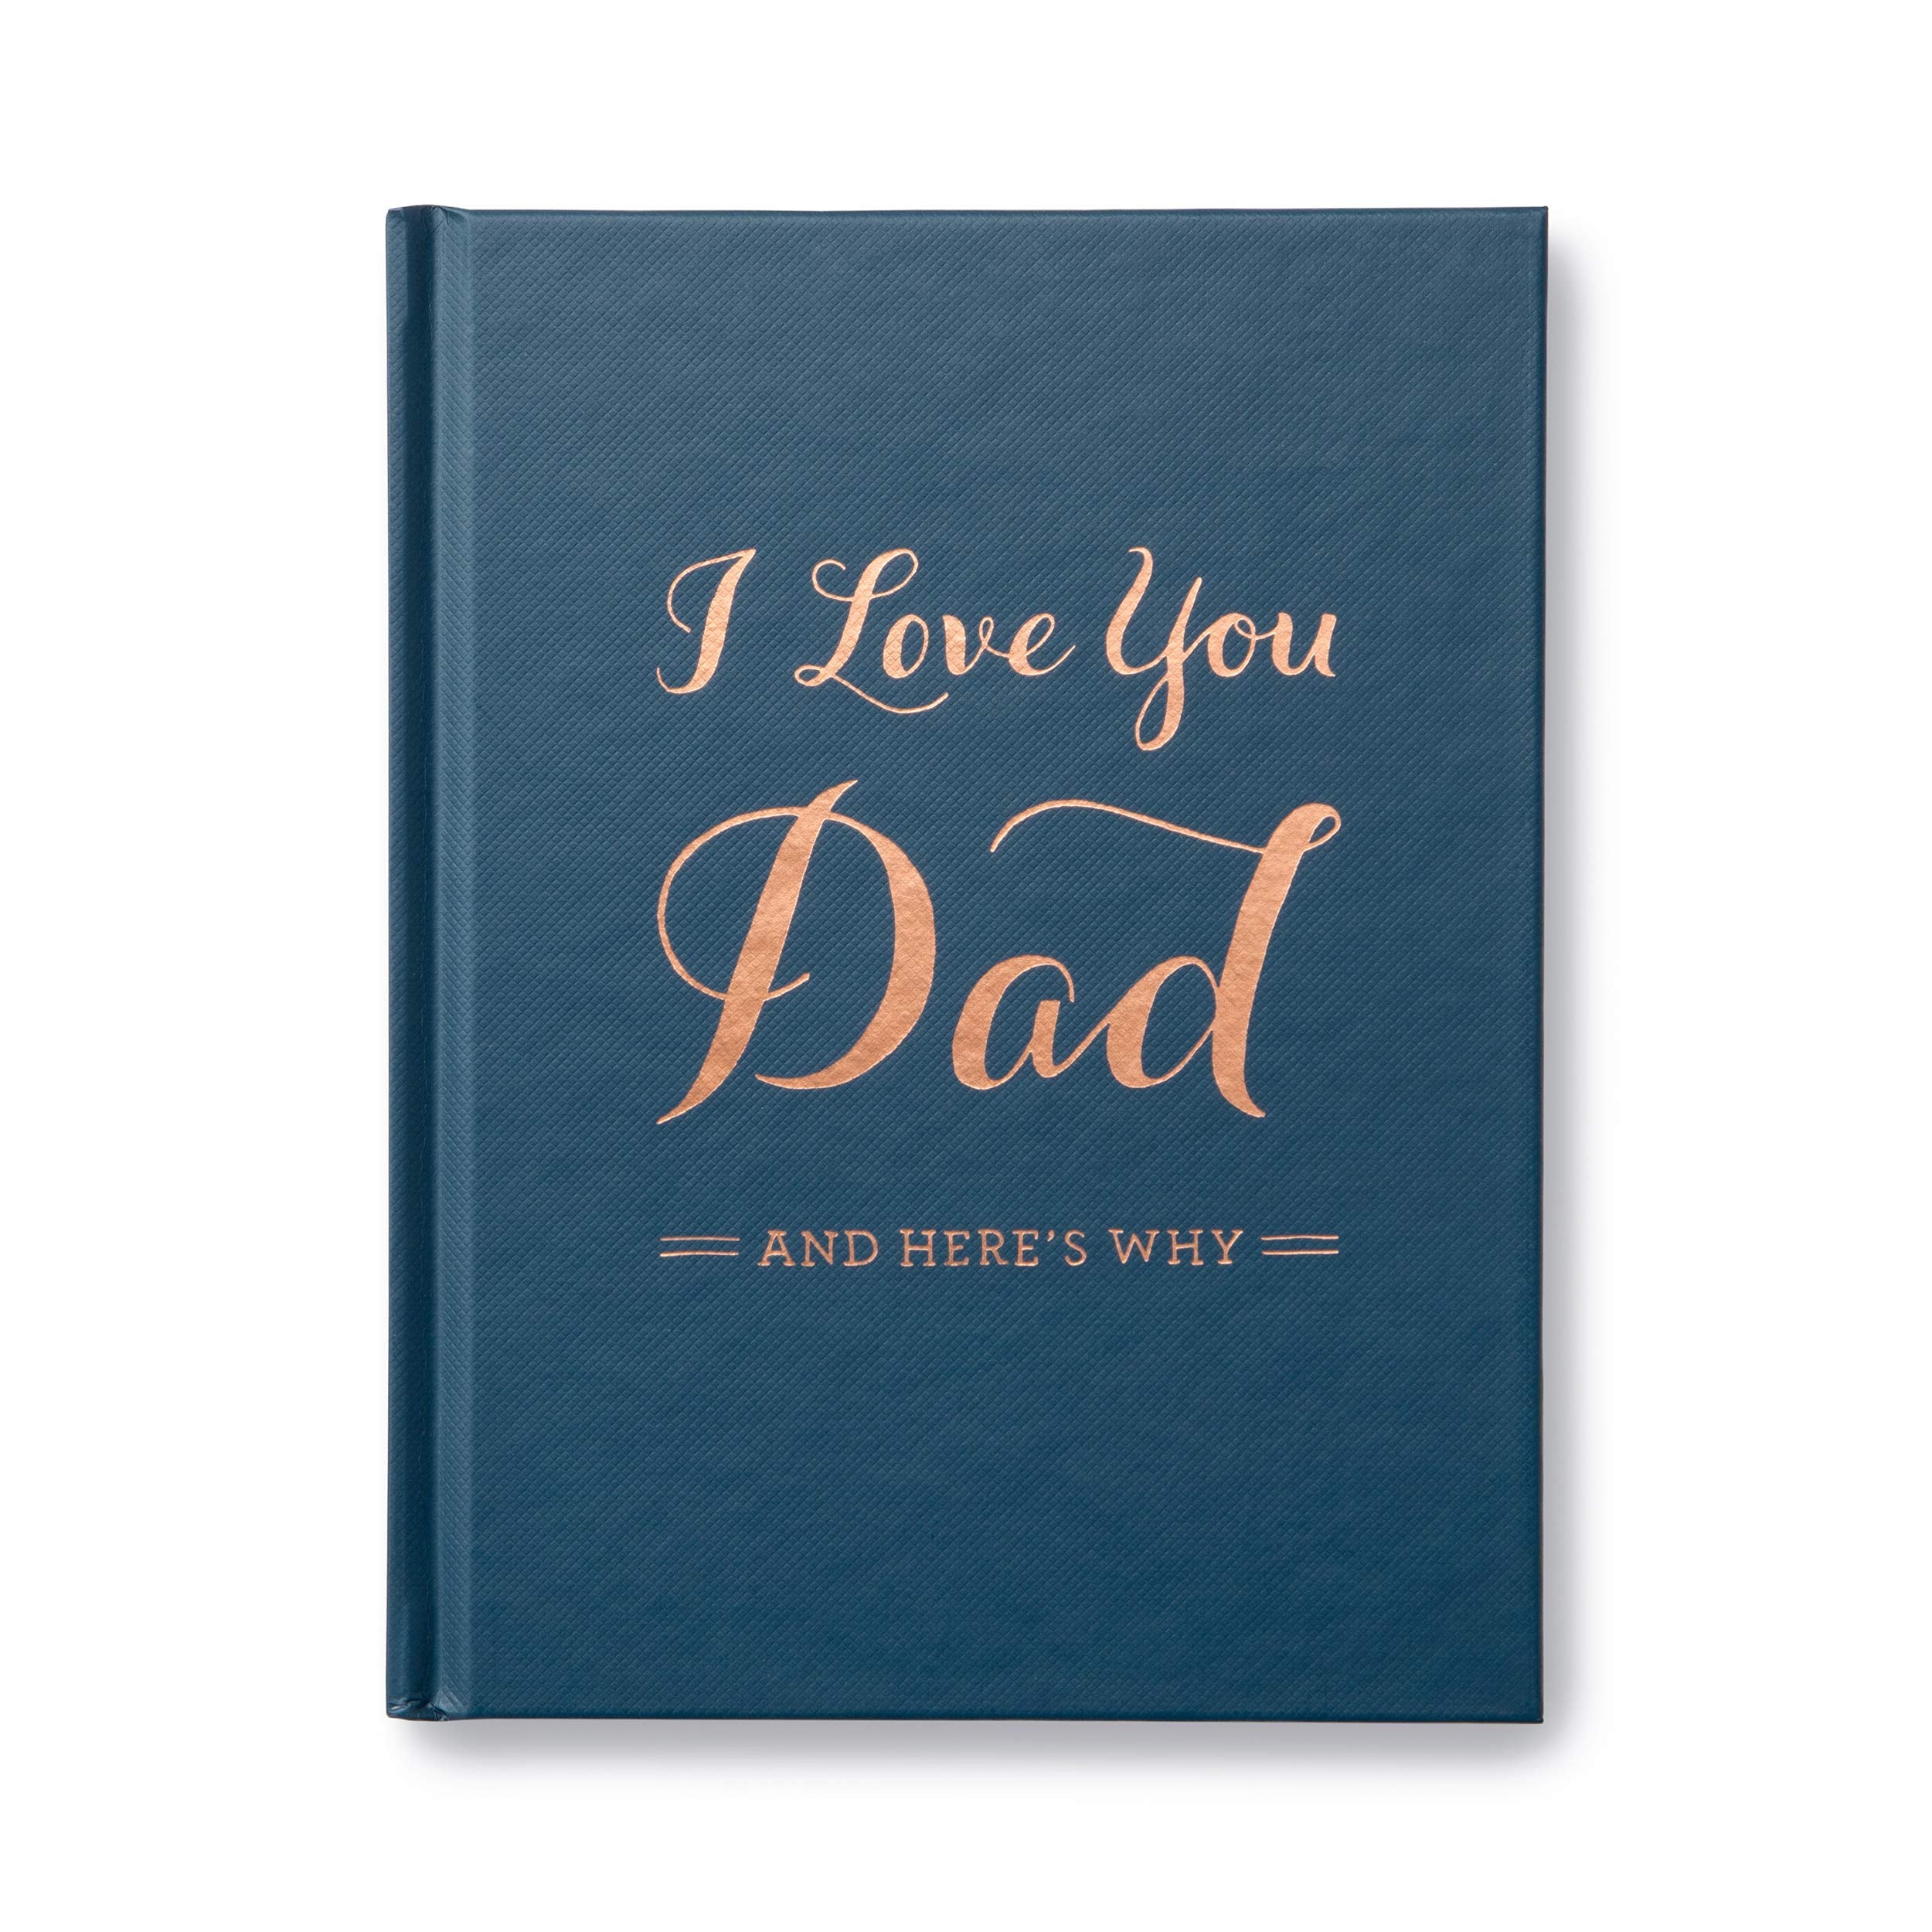 I Love You Dad: And Here's Why by Clark, M. H.